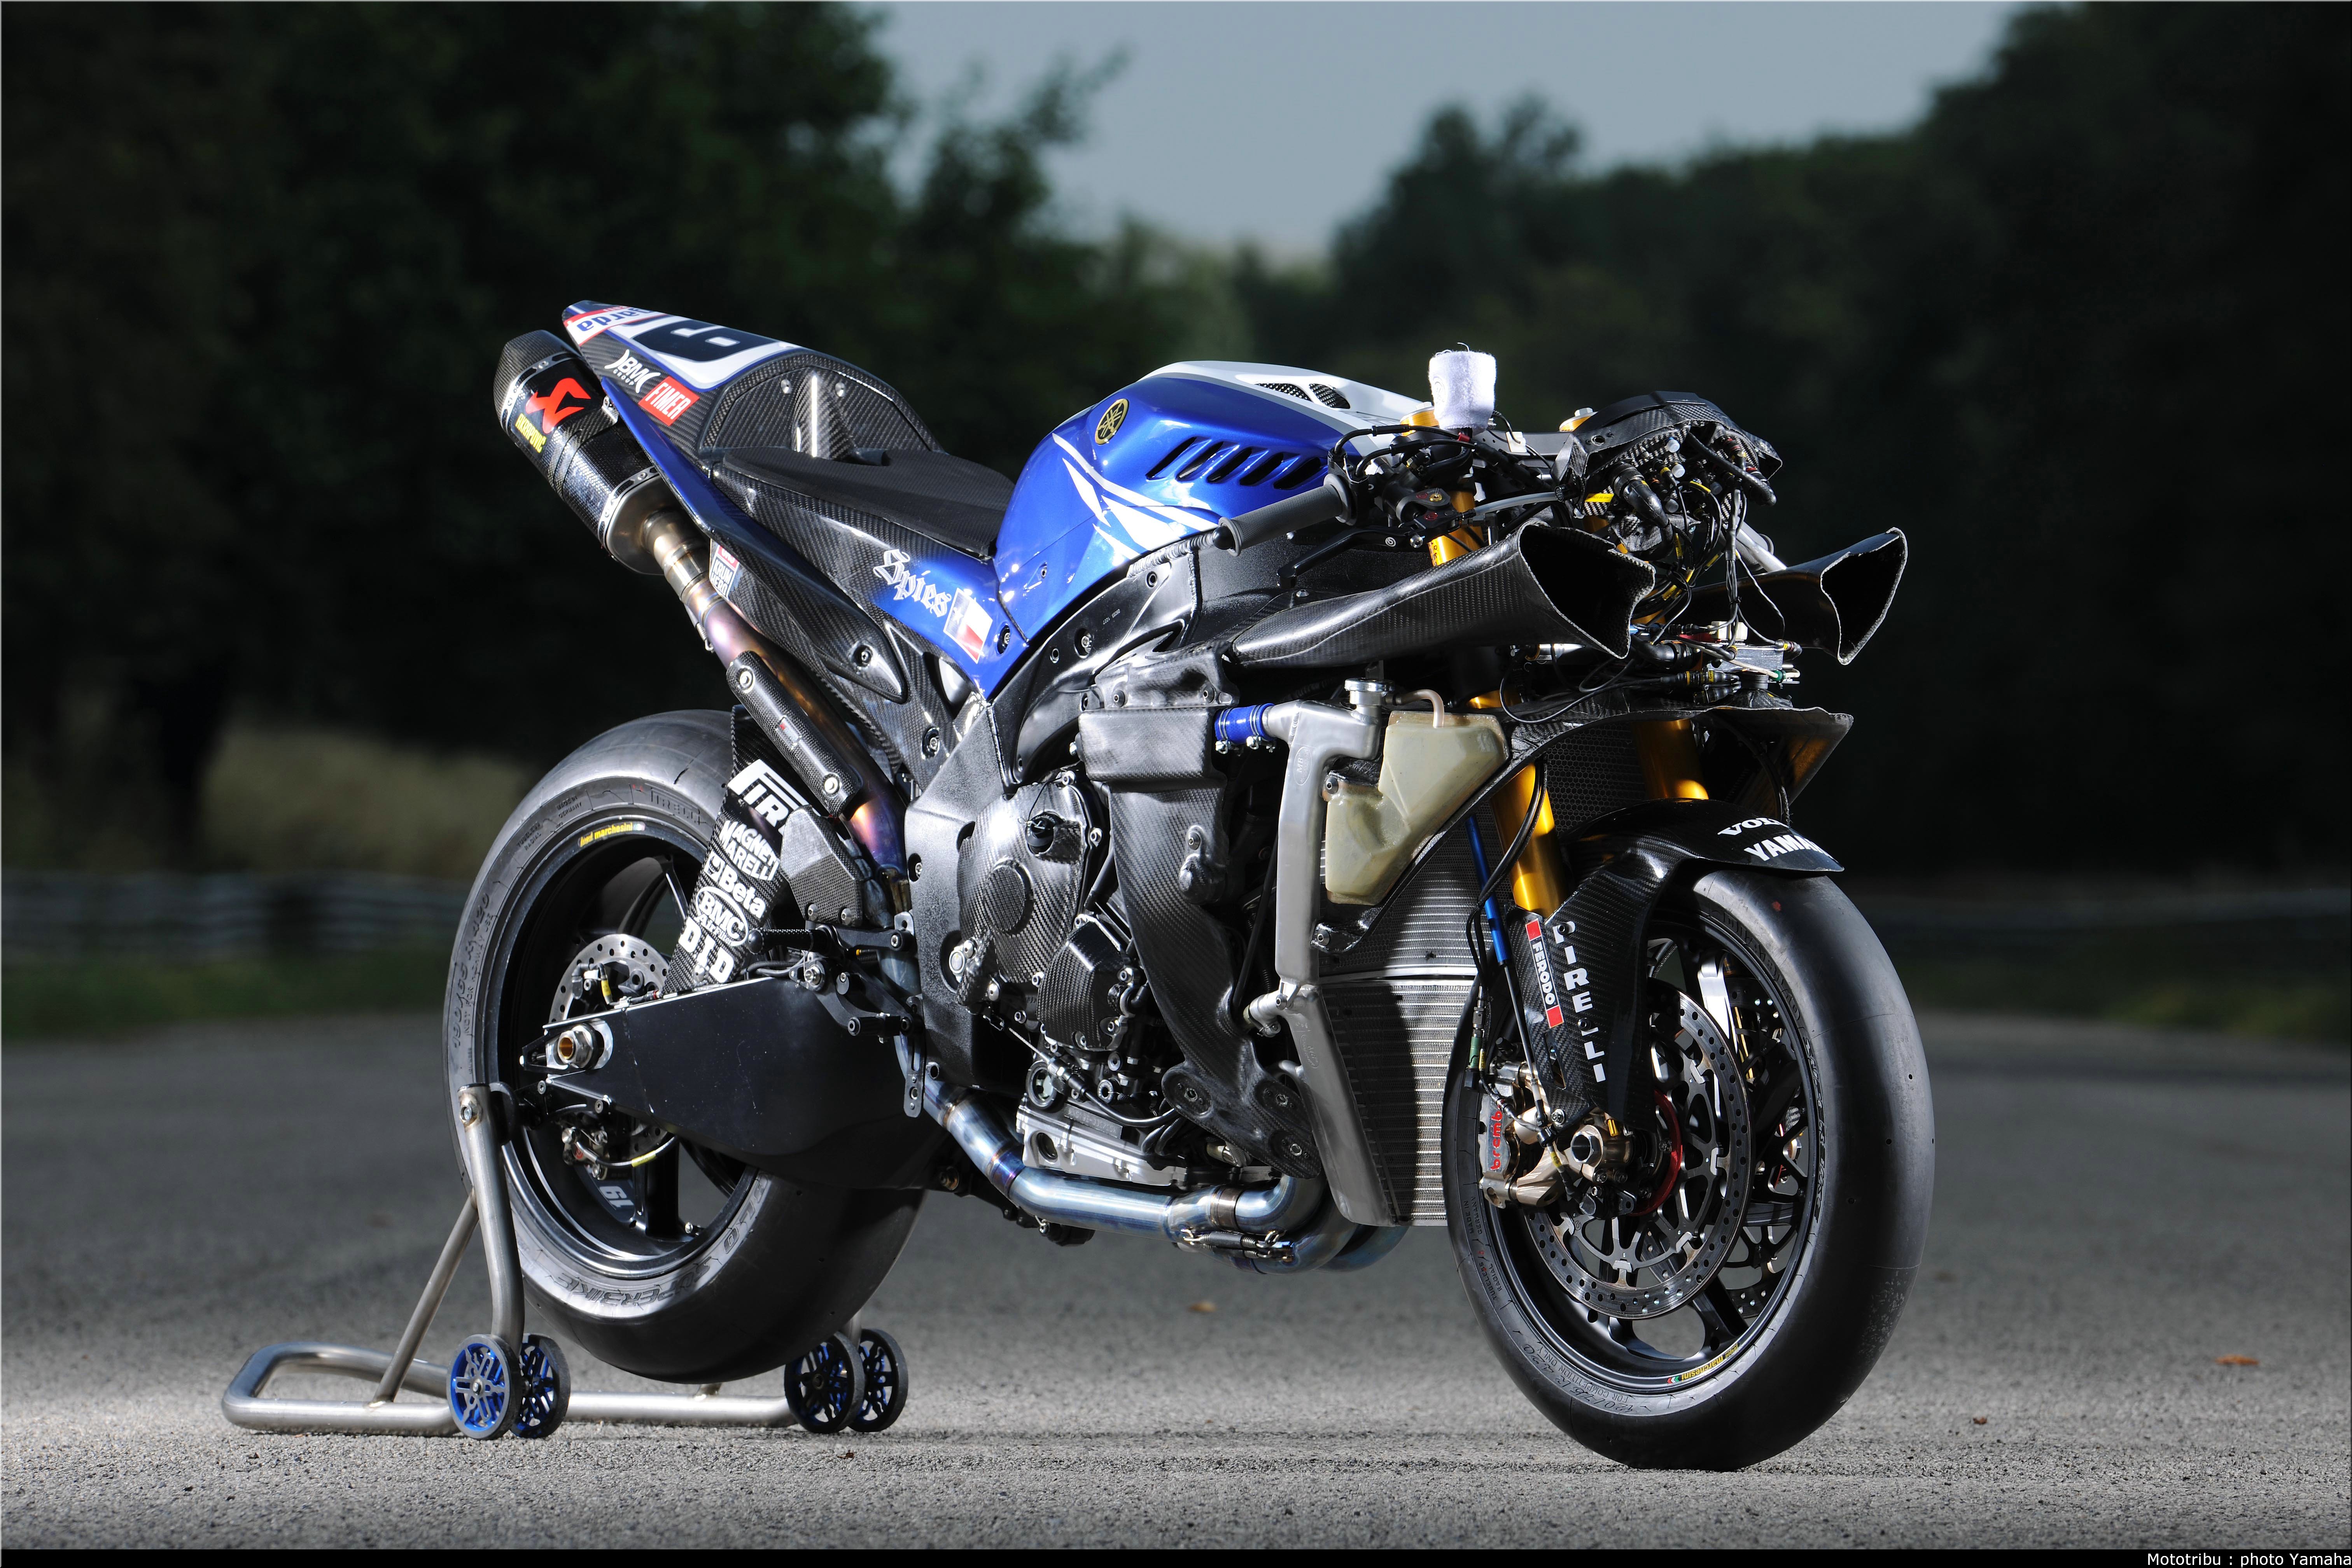 Wallpaper Yamaha R1 Tracking Fast Bikes Image Crazy Gallery